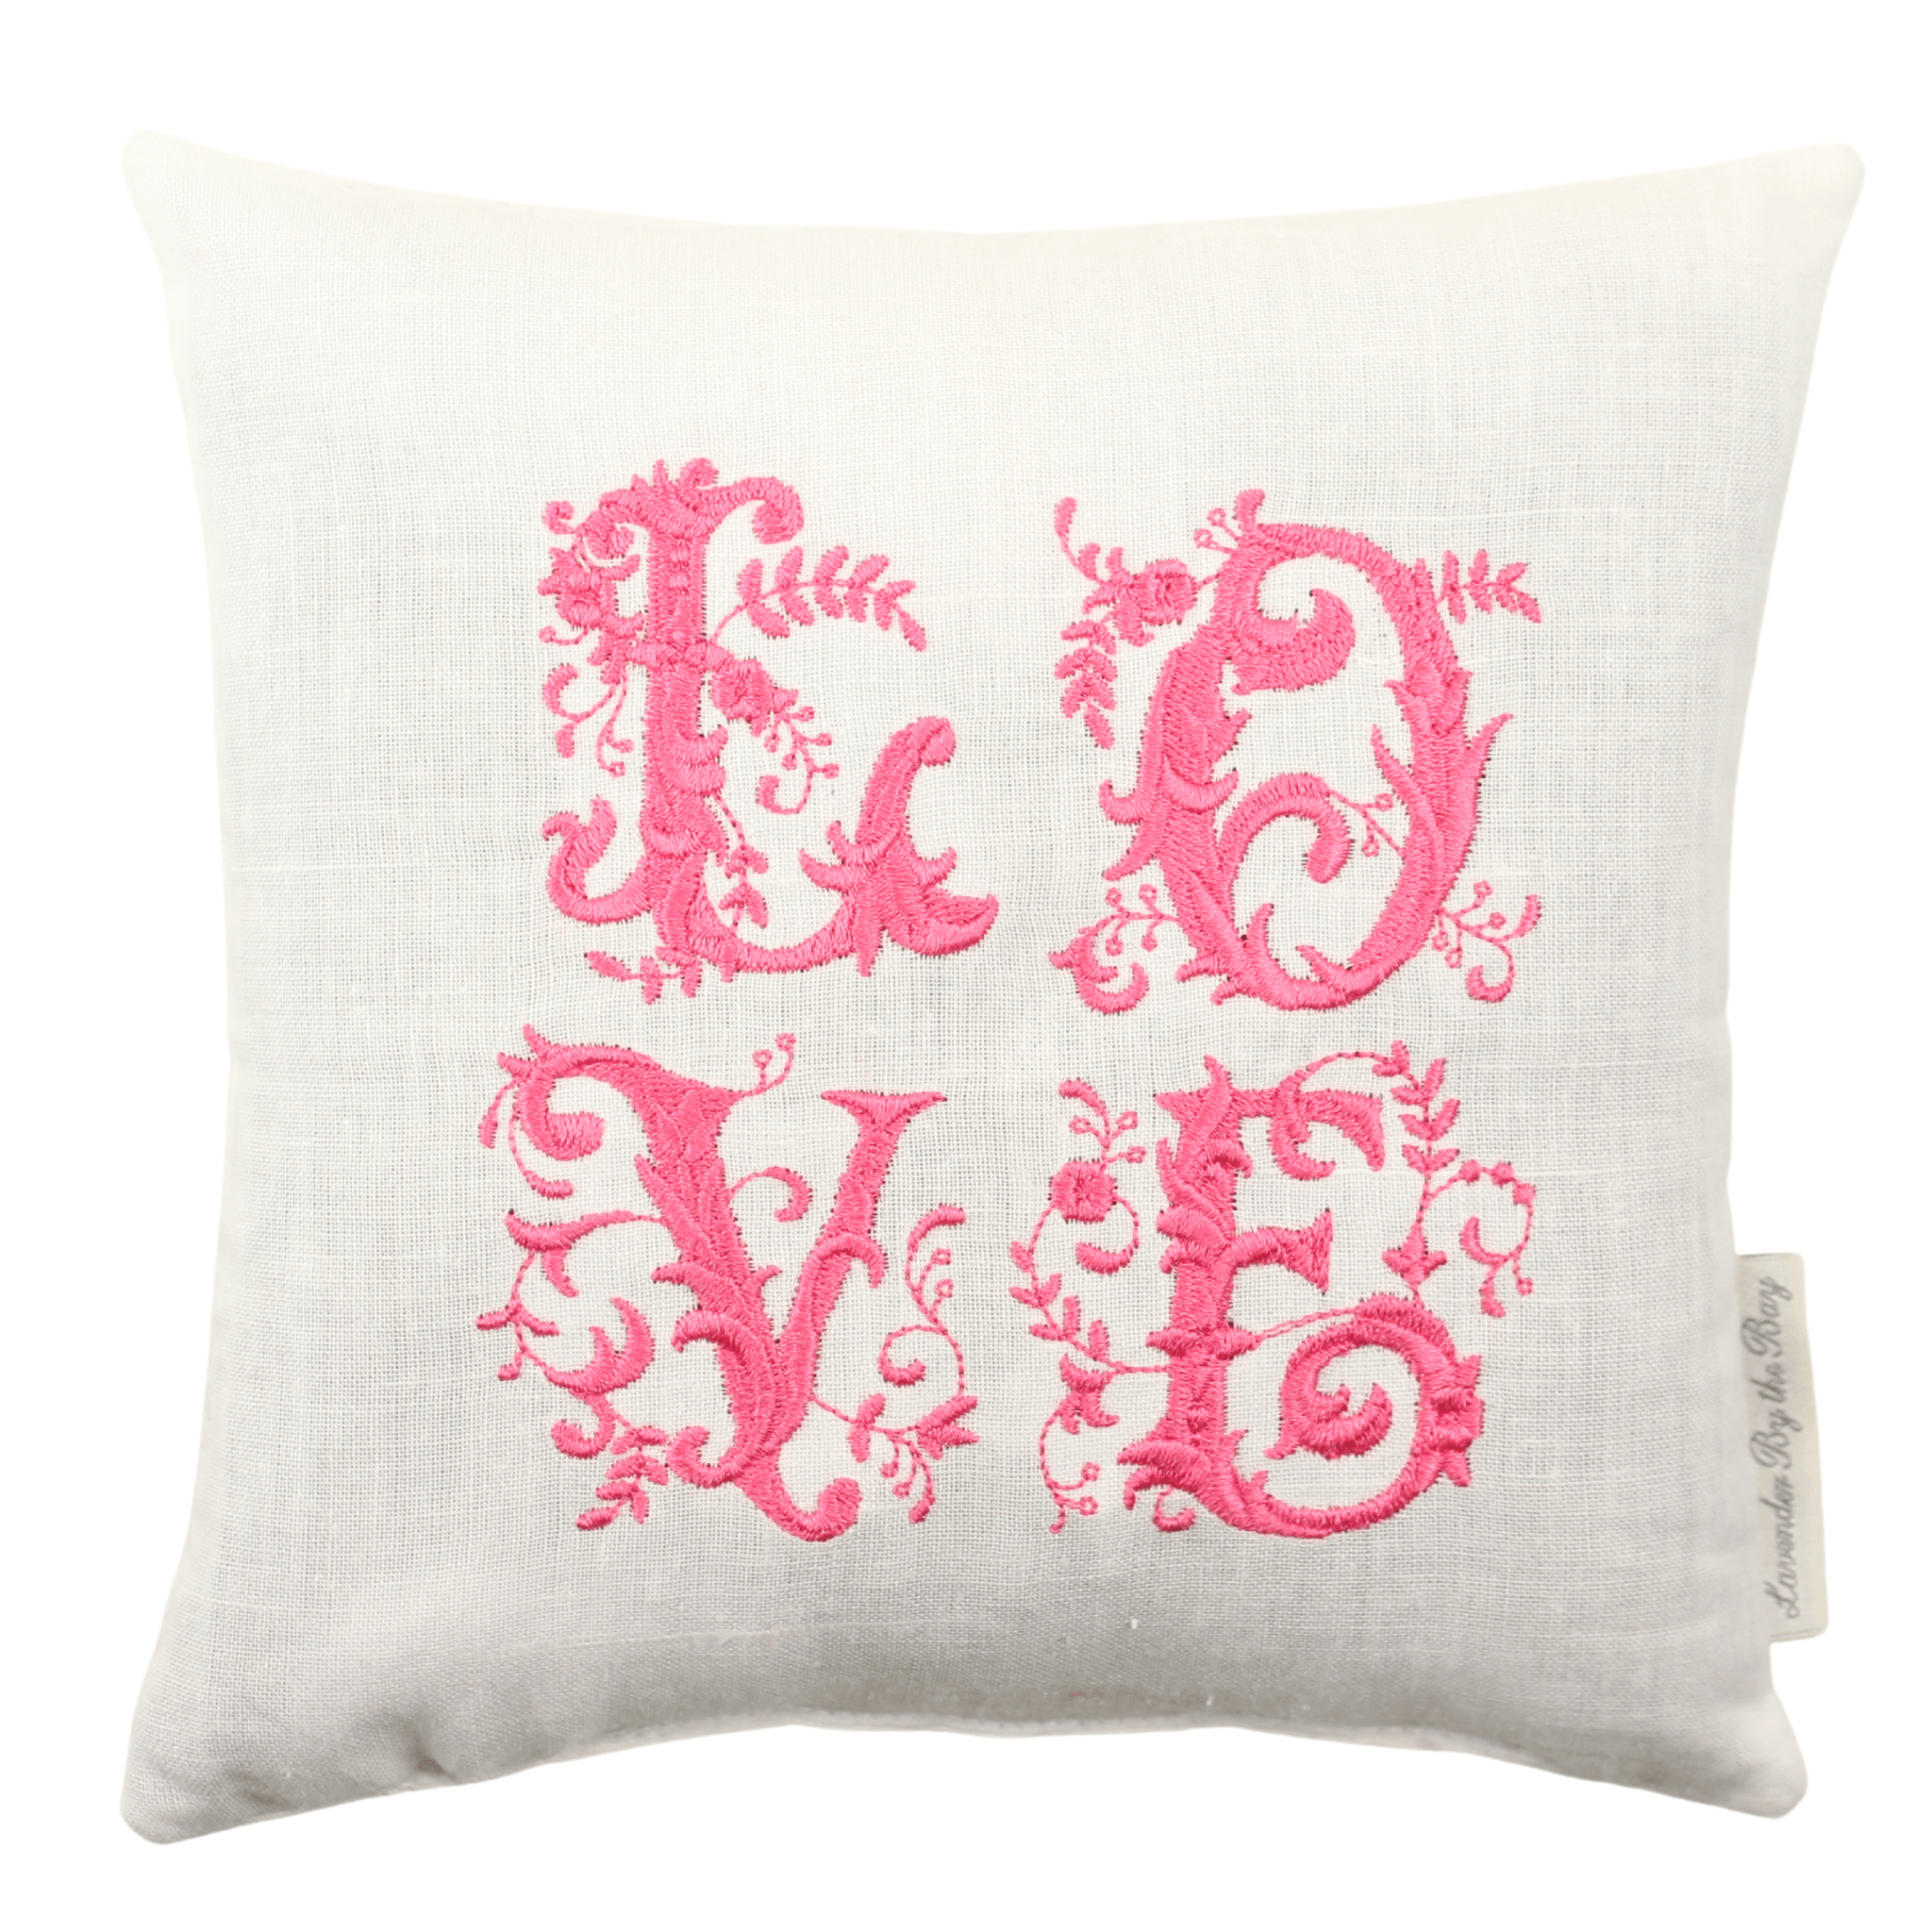 Embroidered Love Lavender Sachet - Lavender By The Bay